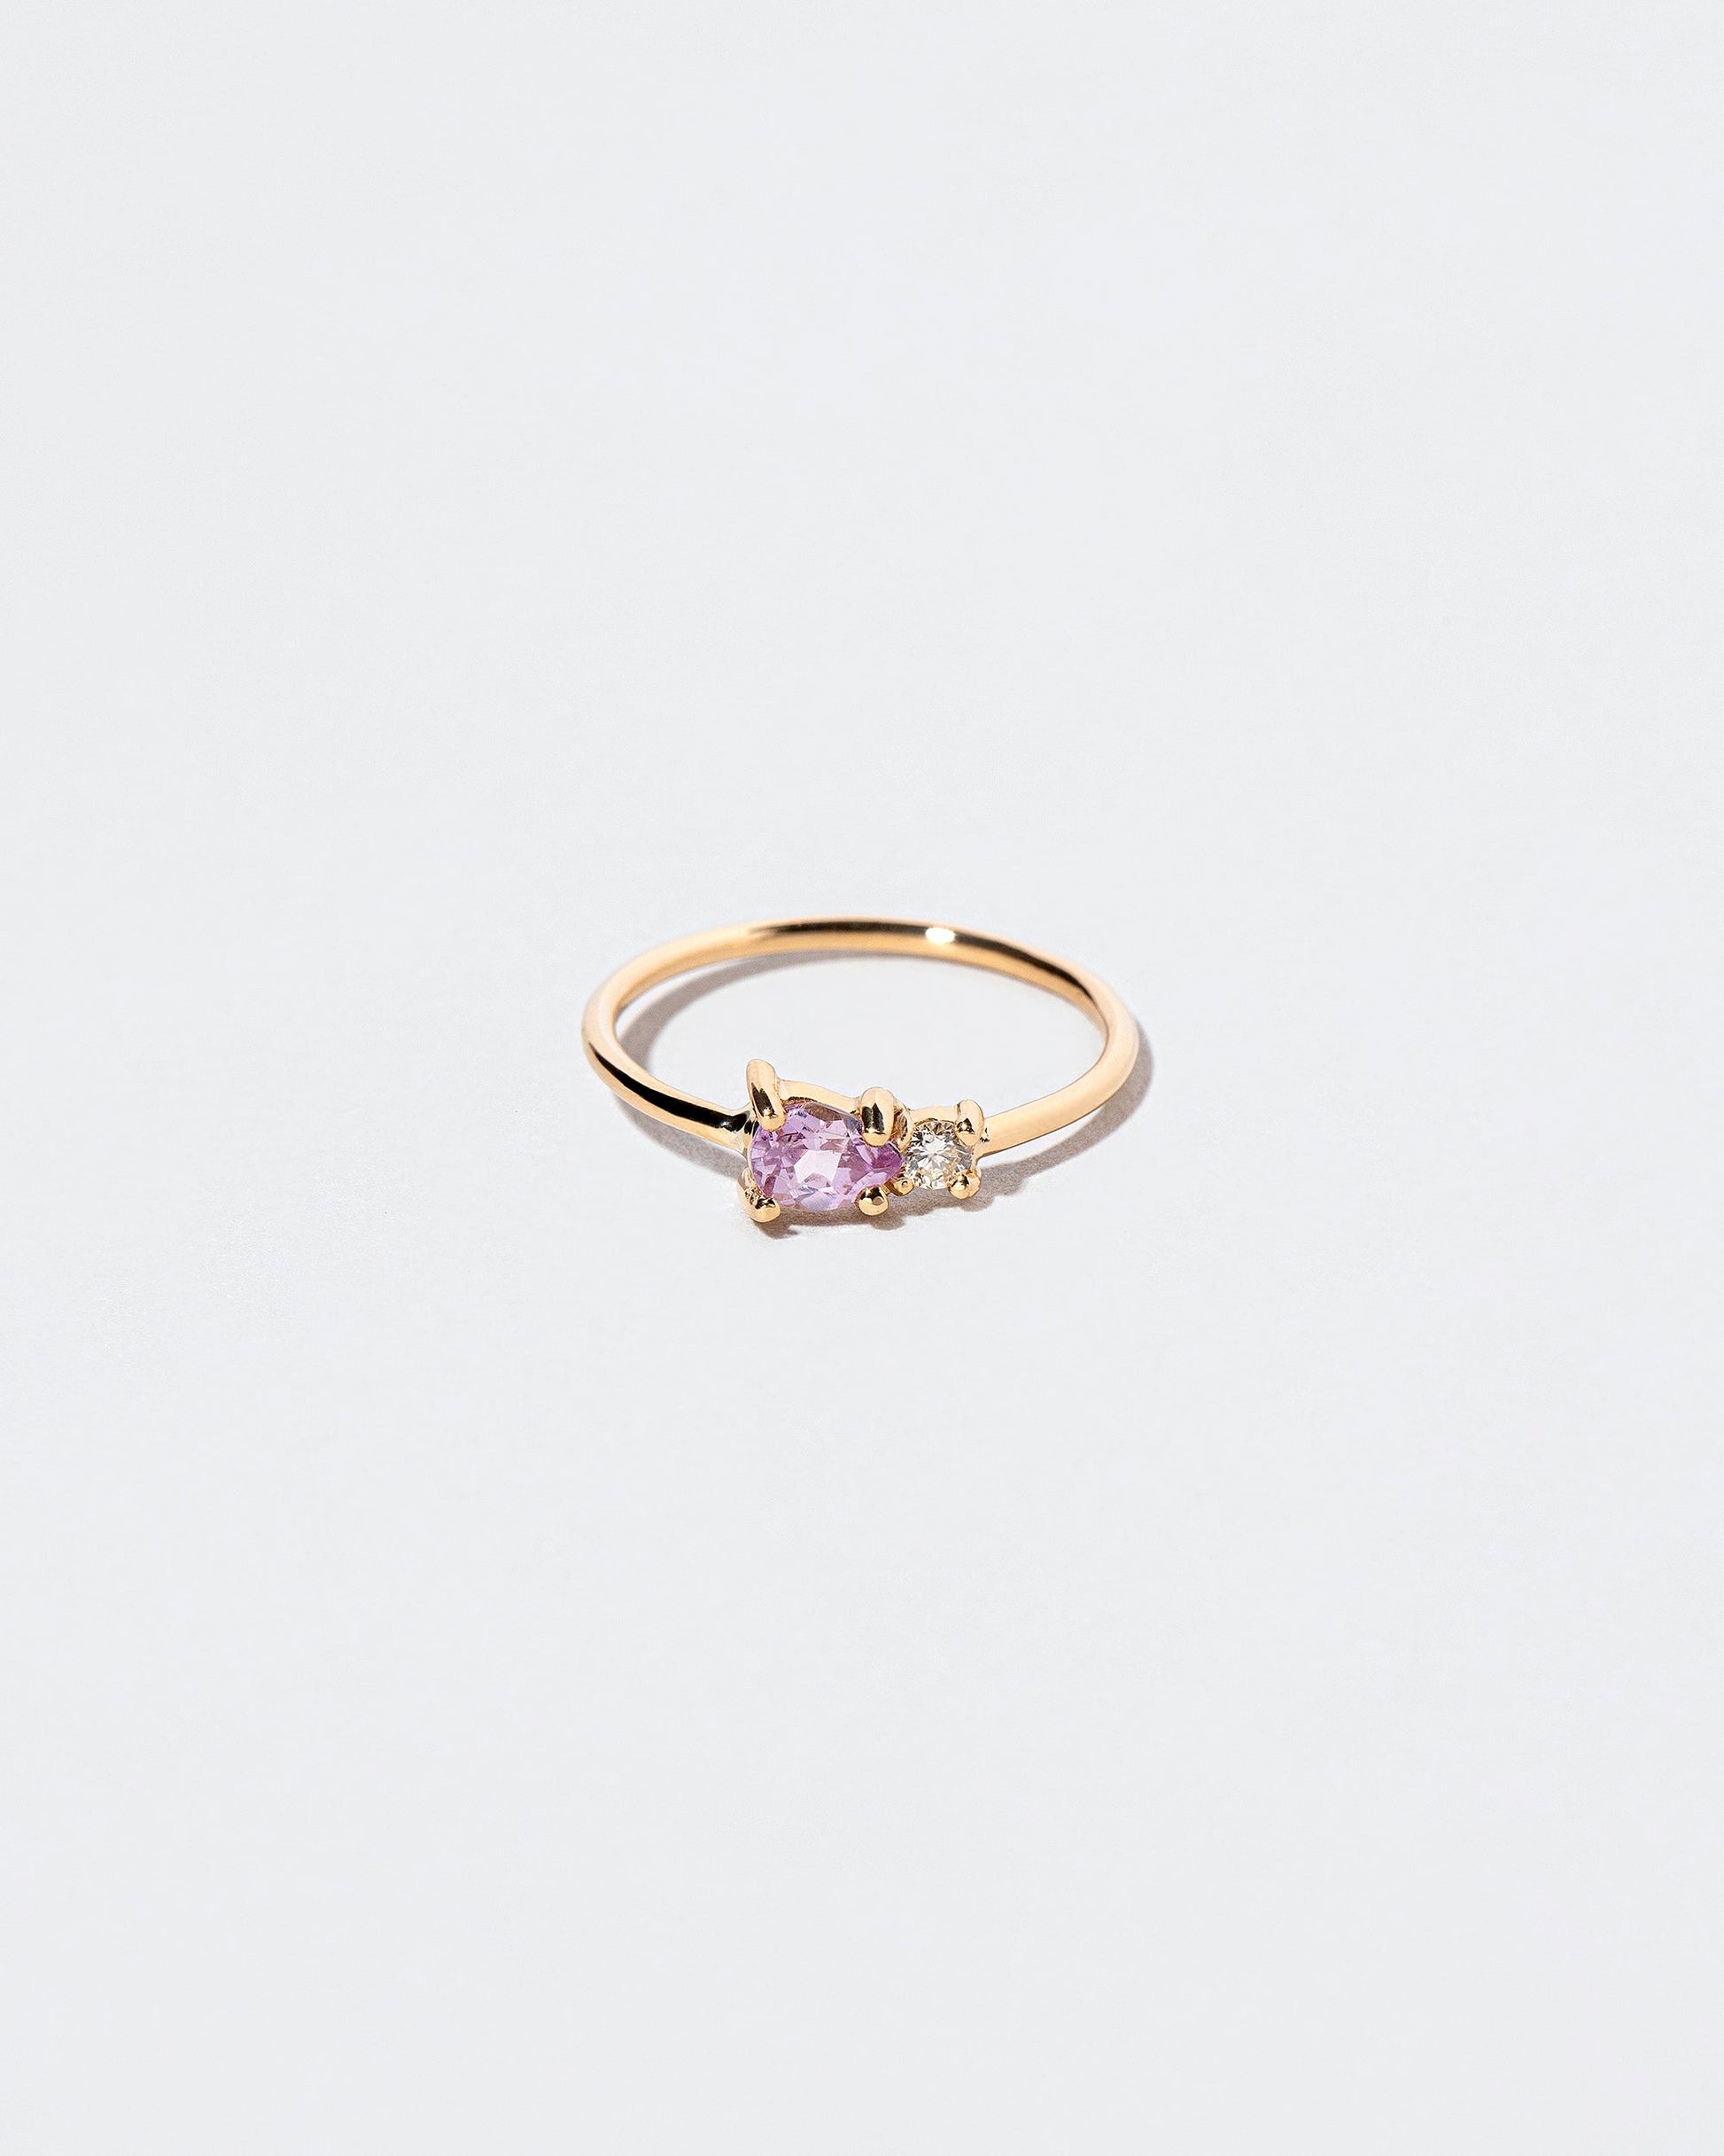 Pink Sapphire Teardrop Ring on light color background.